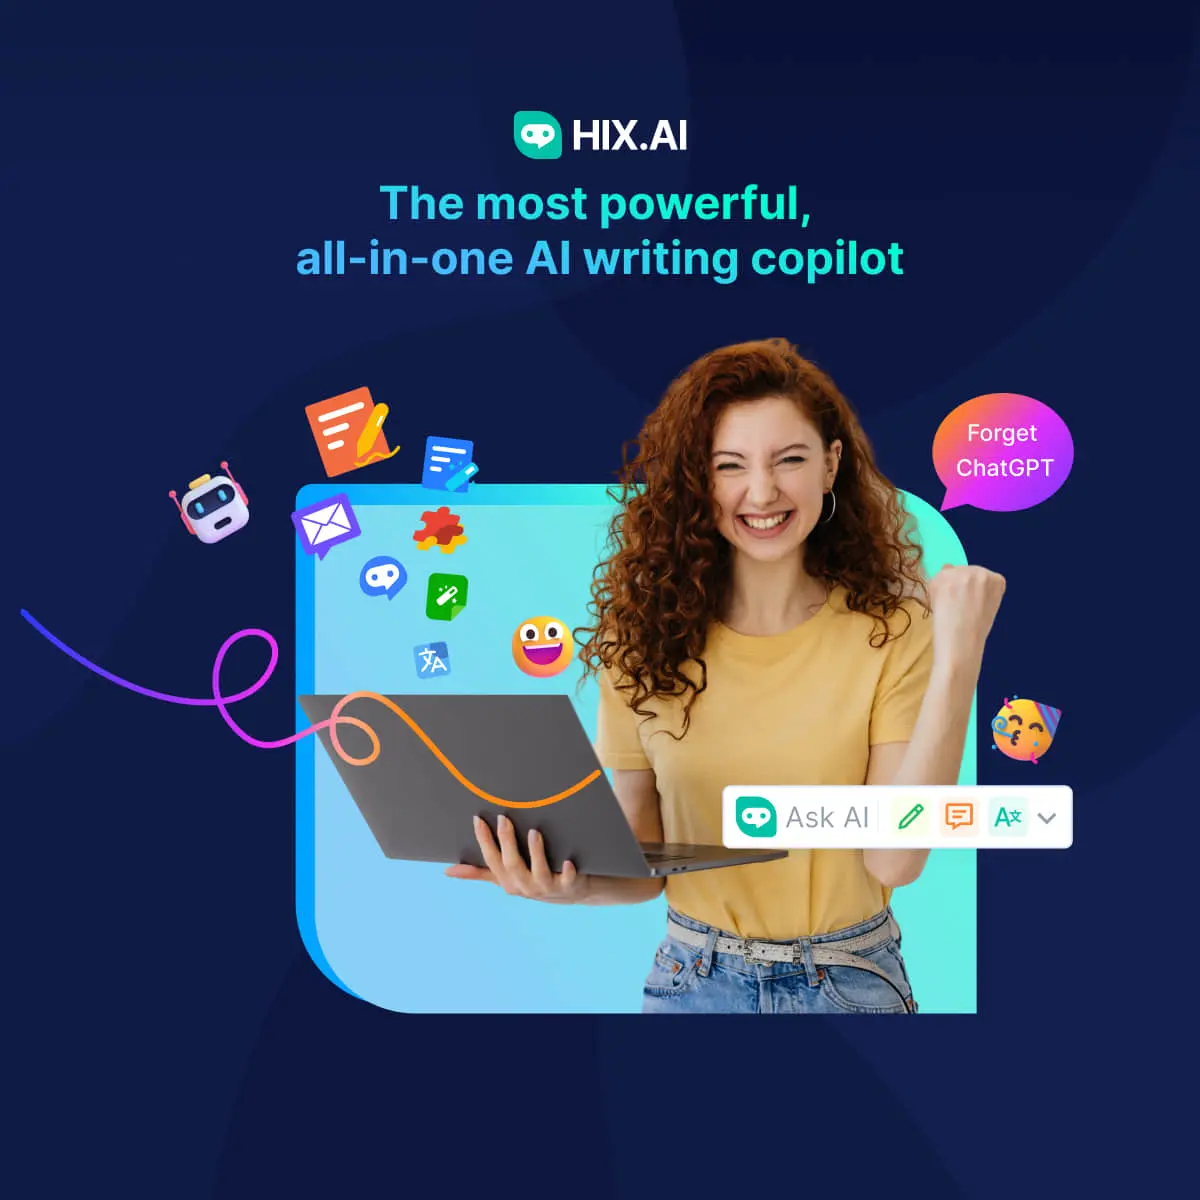 HIX.AI: Your Most Powerful, All-In-One AI Writing Copilot